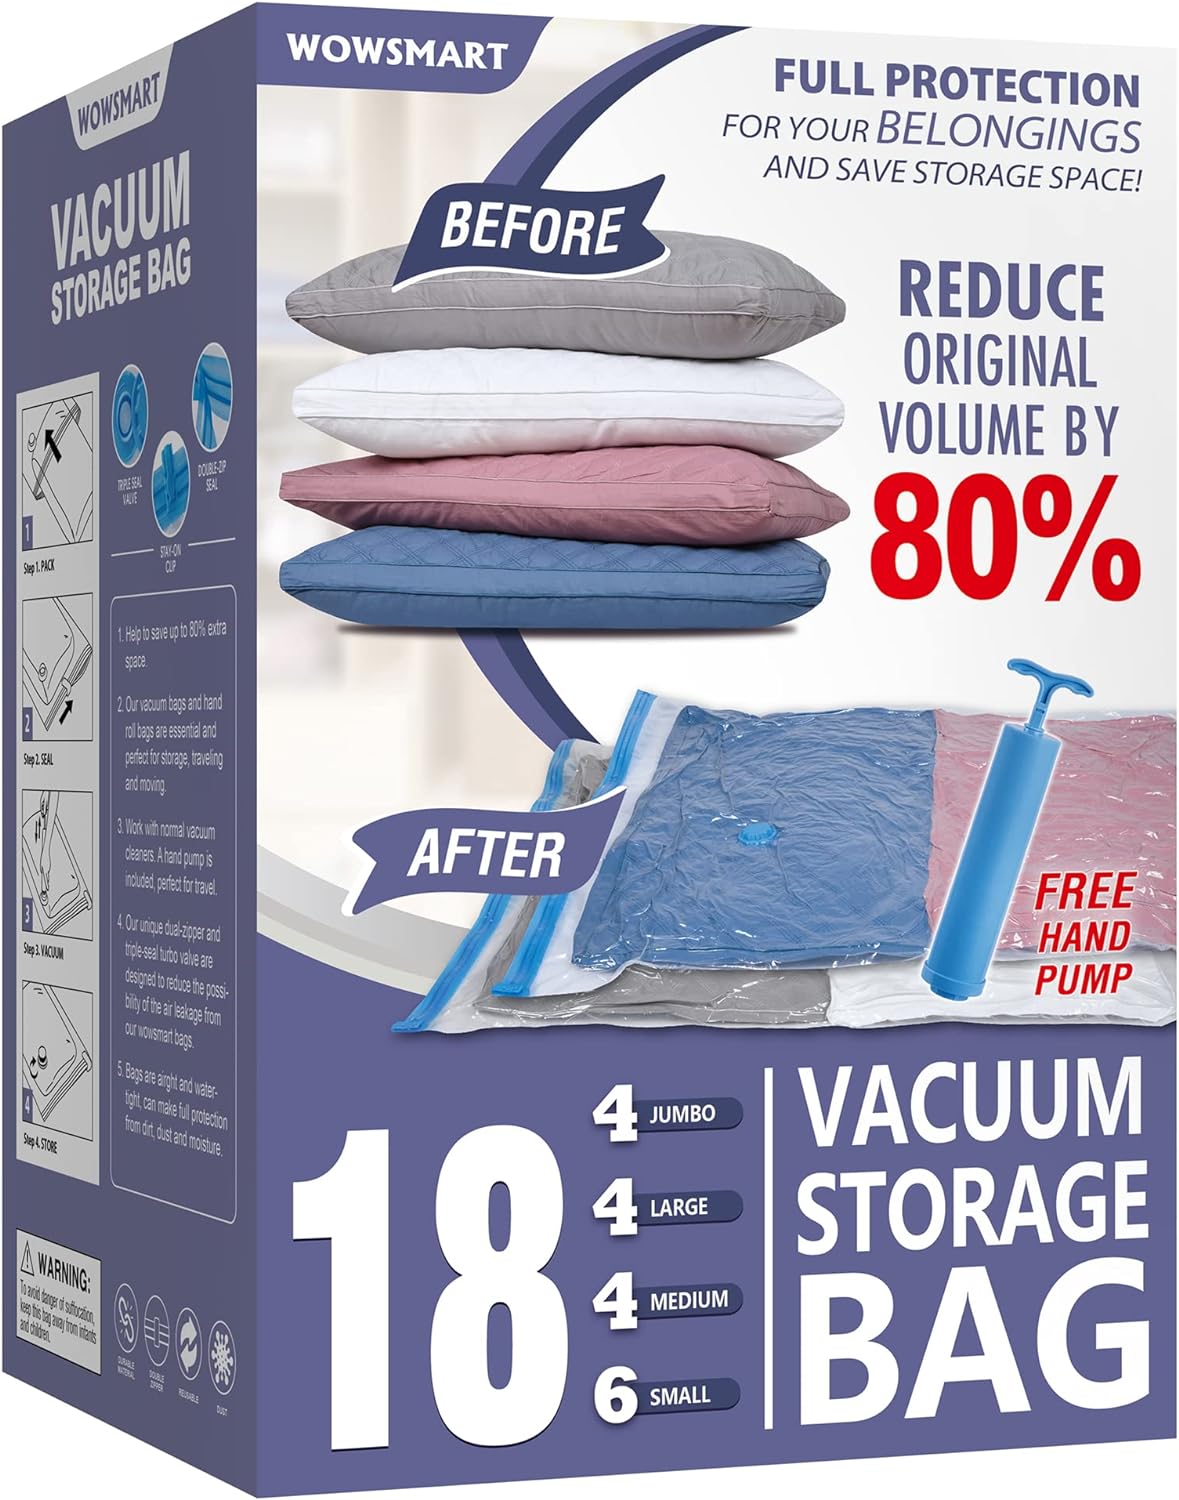 I cannot recommend these vacuum storage bags highly enough! As someone who' always struggled with limited closet and storage space, these bags have been an absolute game-changer. The variety of sizes included in this set is perfect for organizing everything from bulky comforters to seasonal clothing.The vacuum sealing process is incredibly easy and effective, shrinking the contents down to a fraction of their original size with just a few pumps of the included hand pump. I was pleasantly surpri